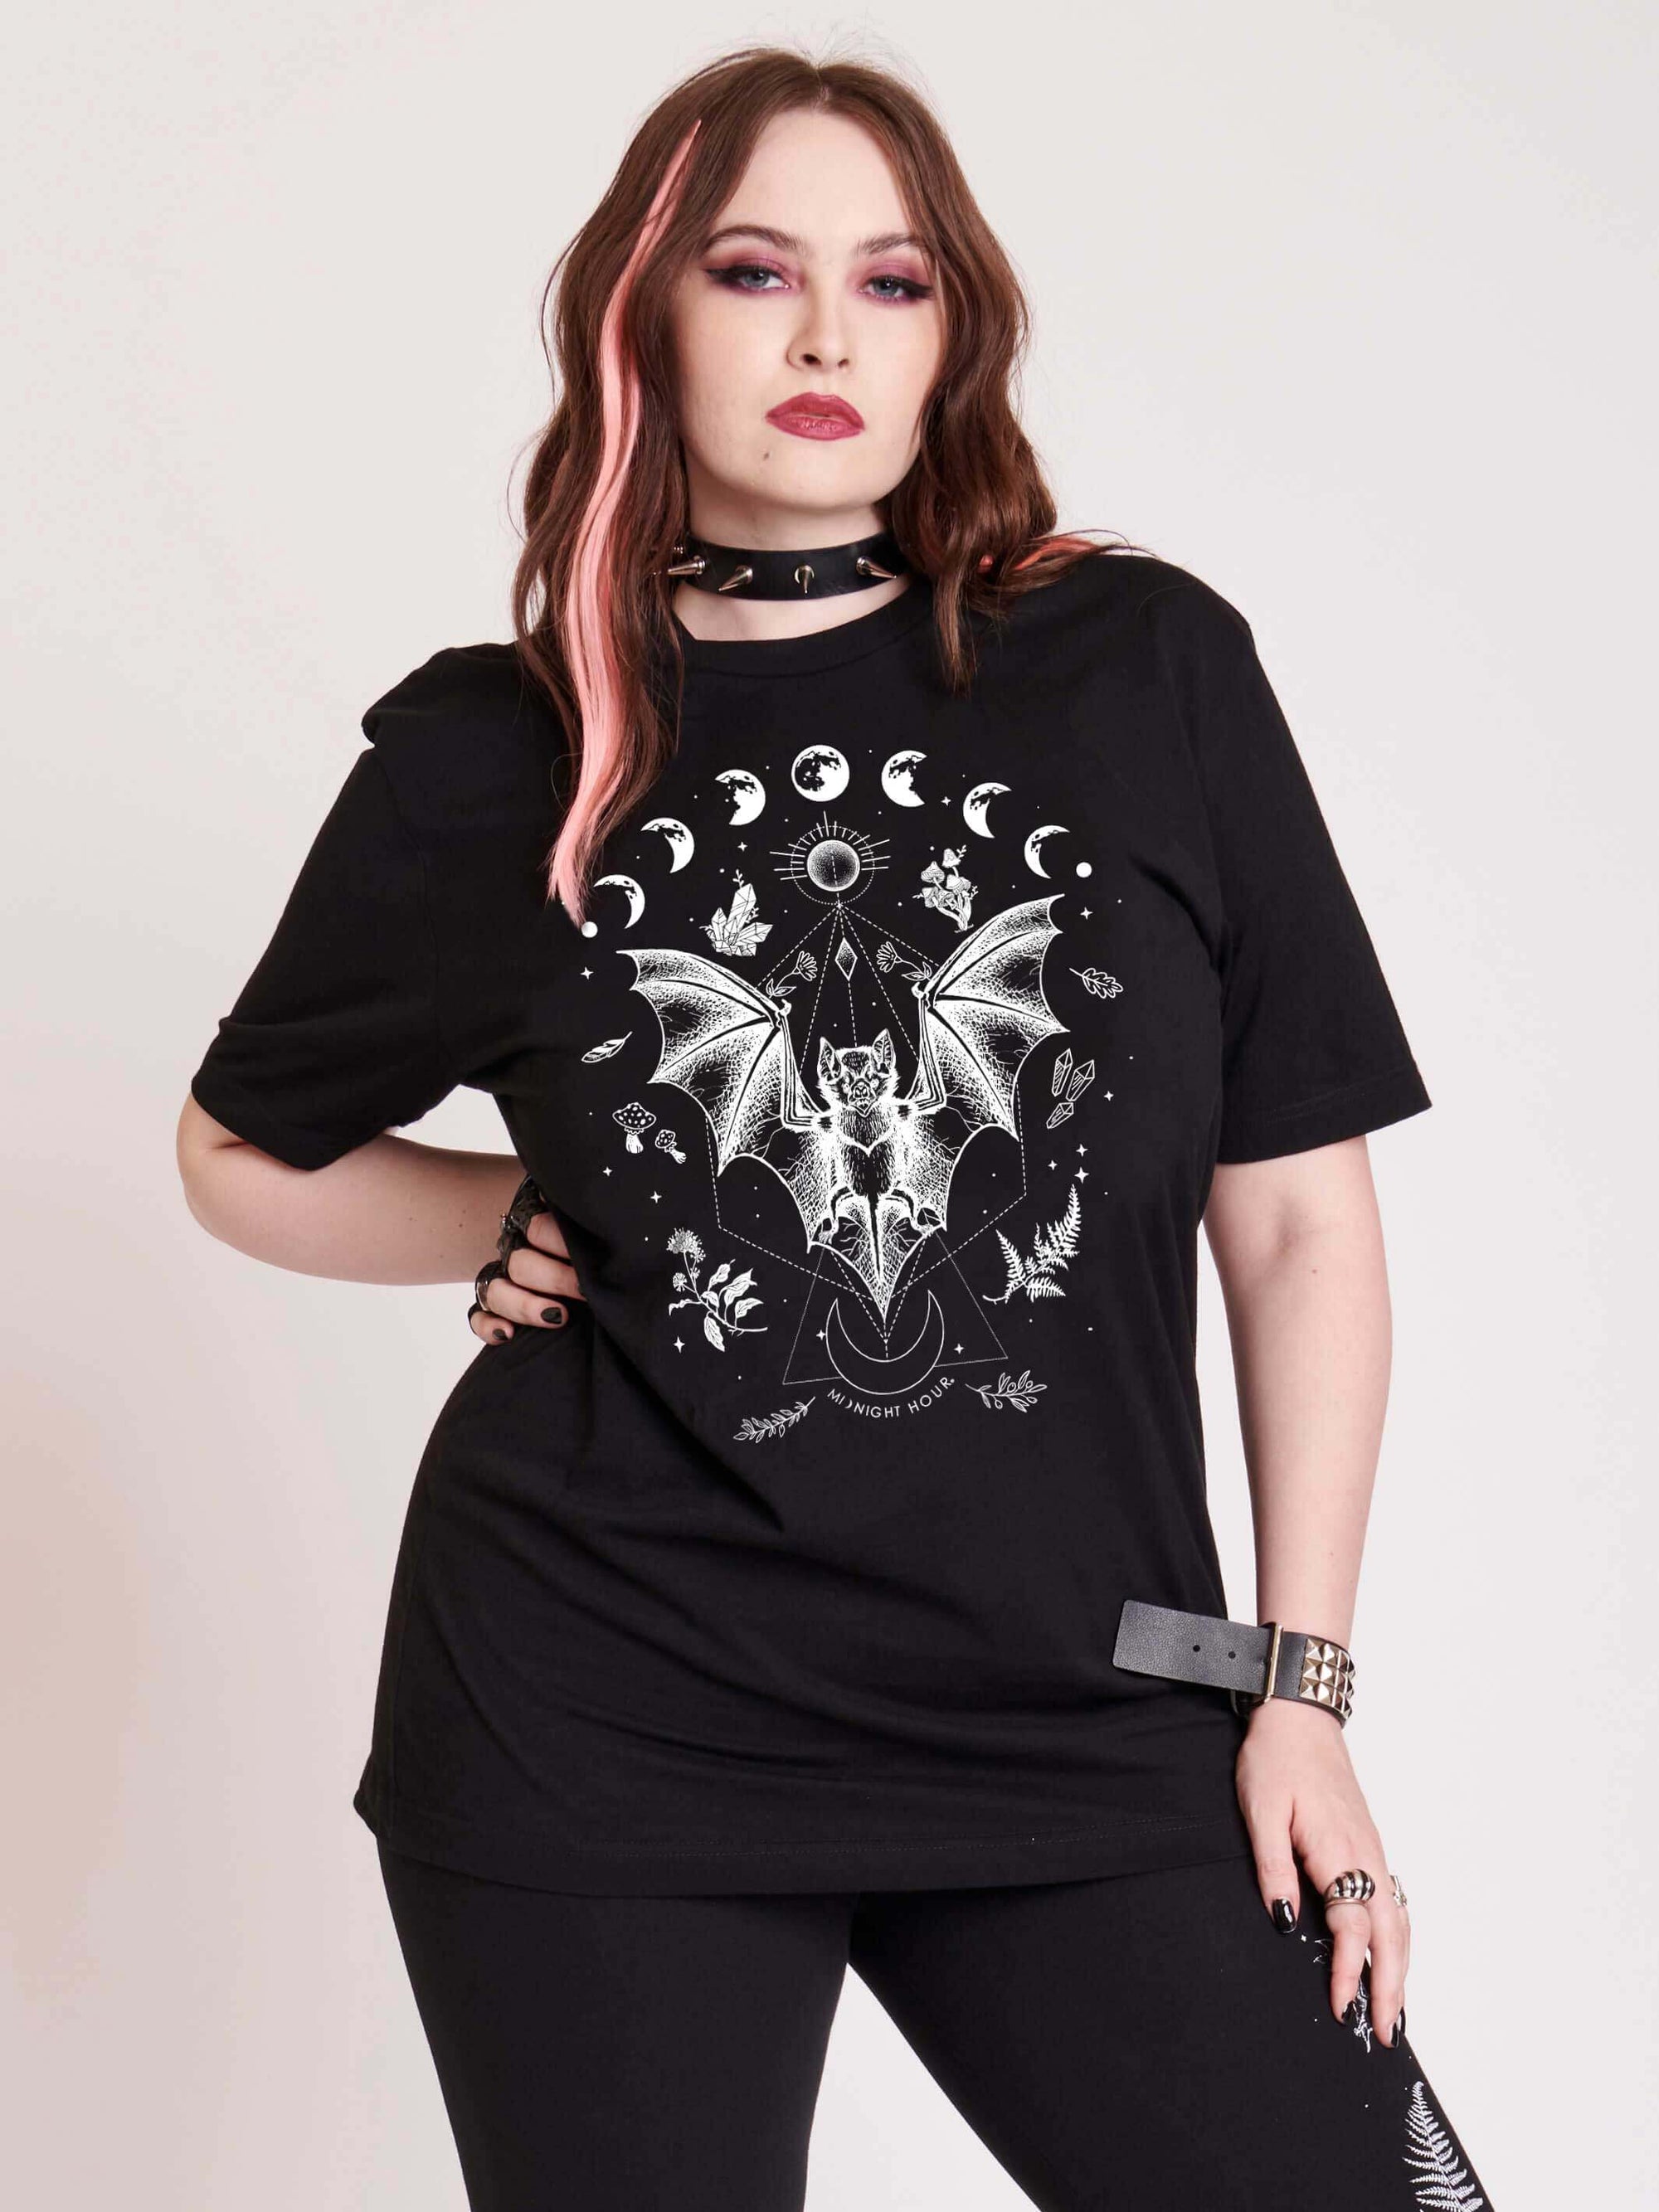 BLACK T-SHIRT WITH BAT AND MOON PHASE DESIGN